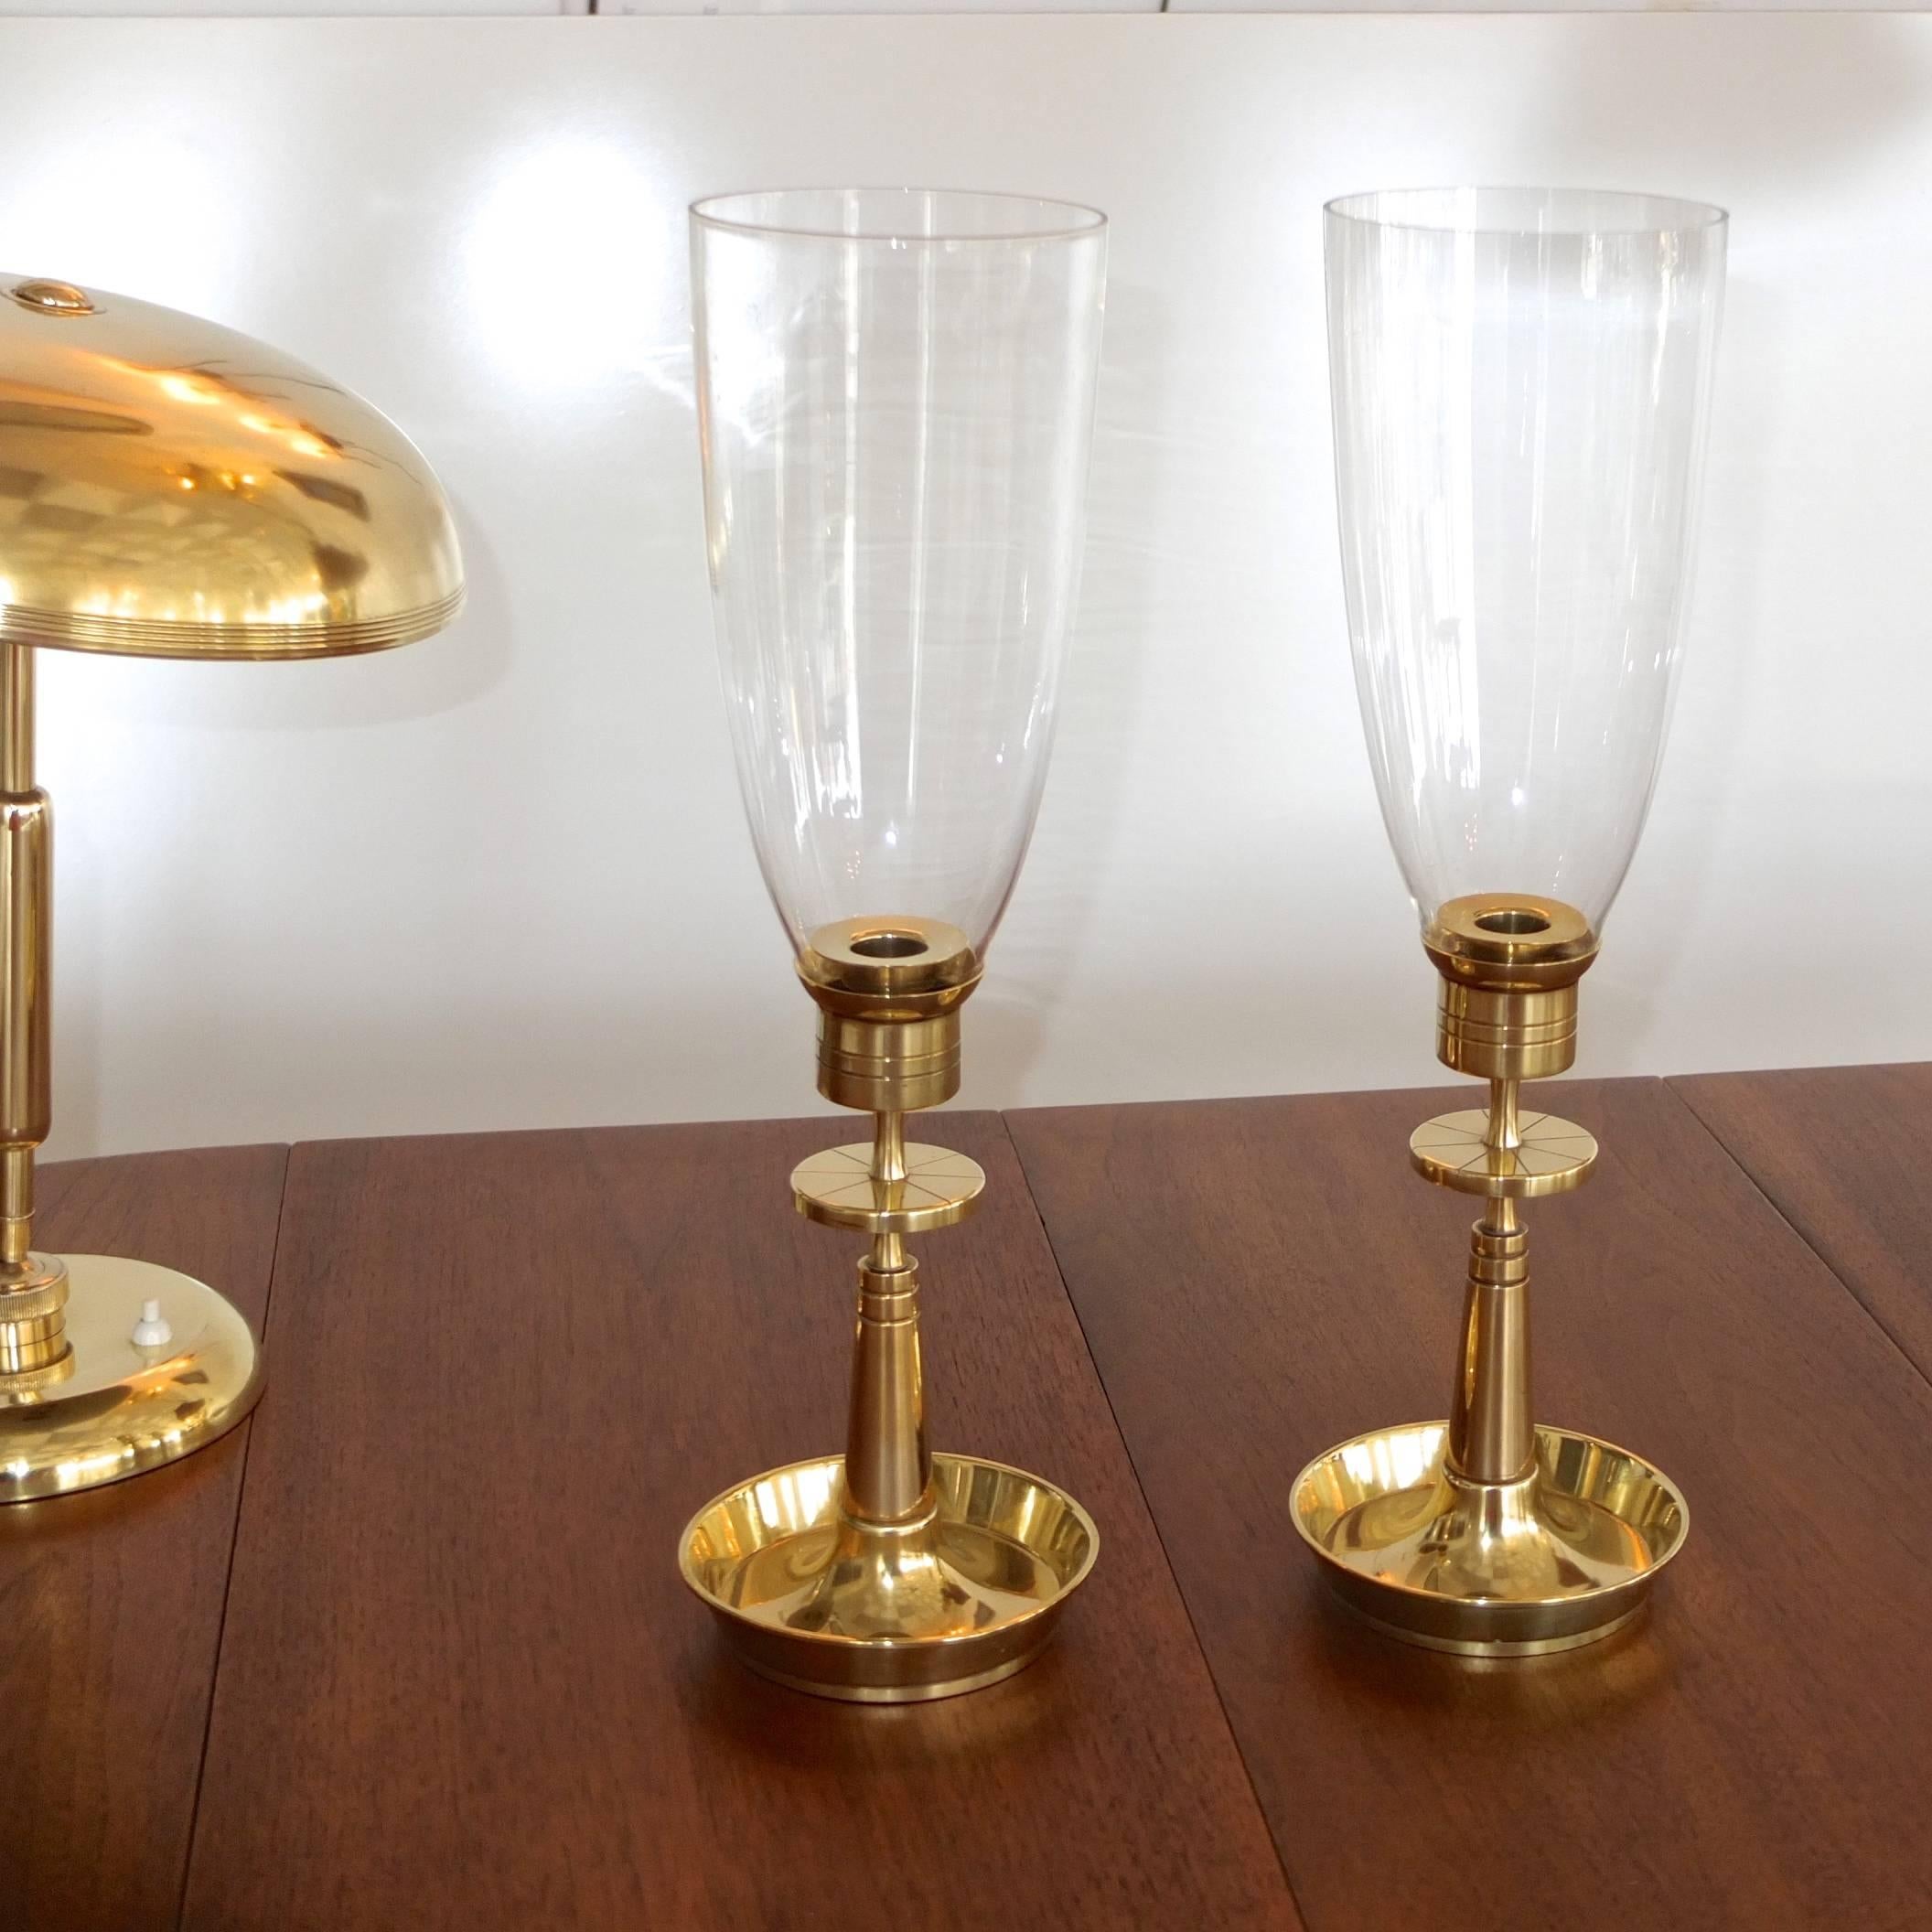 We actually have two pairs available. Price shown is for one pair.

Pair of Tommi Parzinger designed brass candlesticks for Dorlyn Silversmiths circa 1955 with clear glass hurricane shades.

Dimensions for each candleholder are 5.5